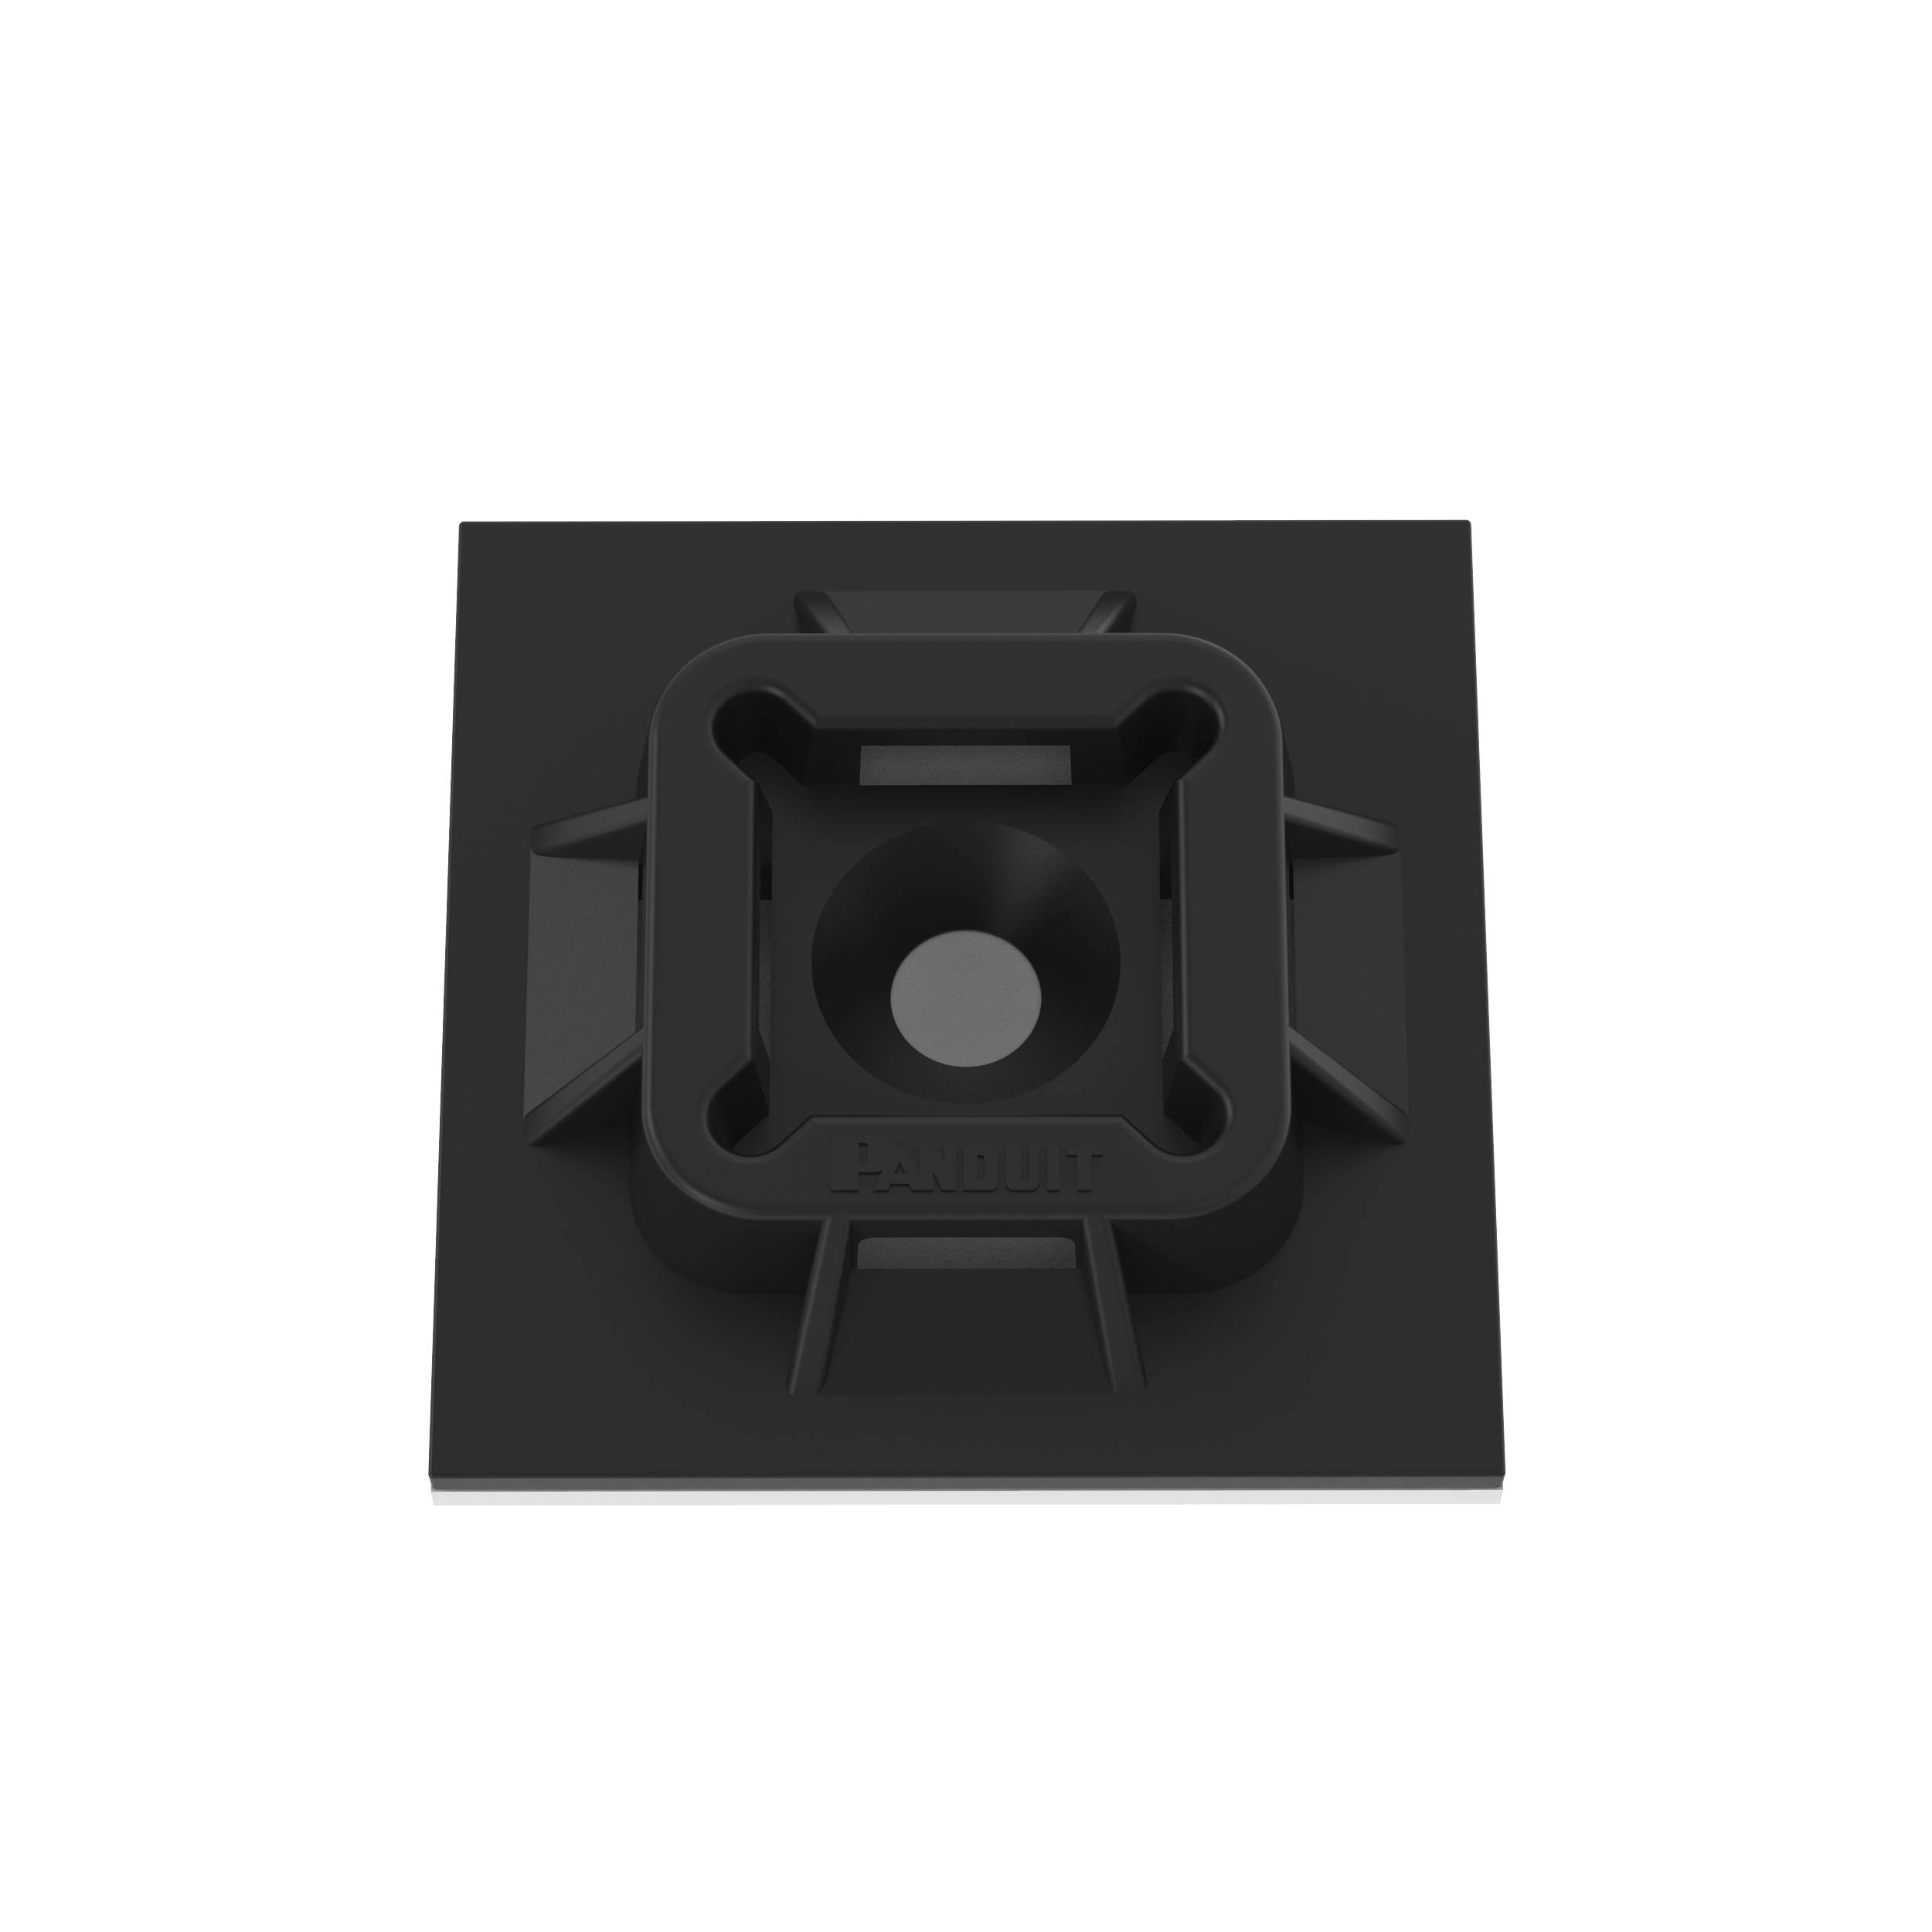 Panduit® ABM100-A-D20 Cable Tie Mount, 4-Way, Rubber Adhesive Tape Mount, 0.19 in W Tie, Nylon 6.6, Black